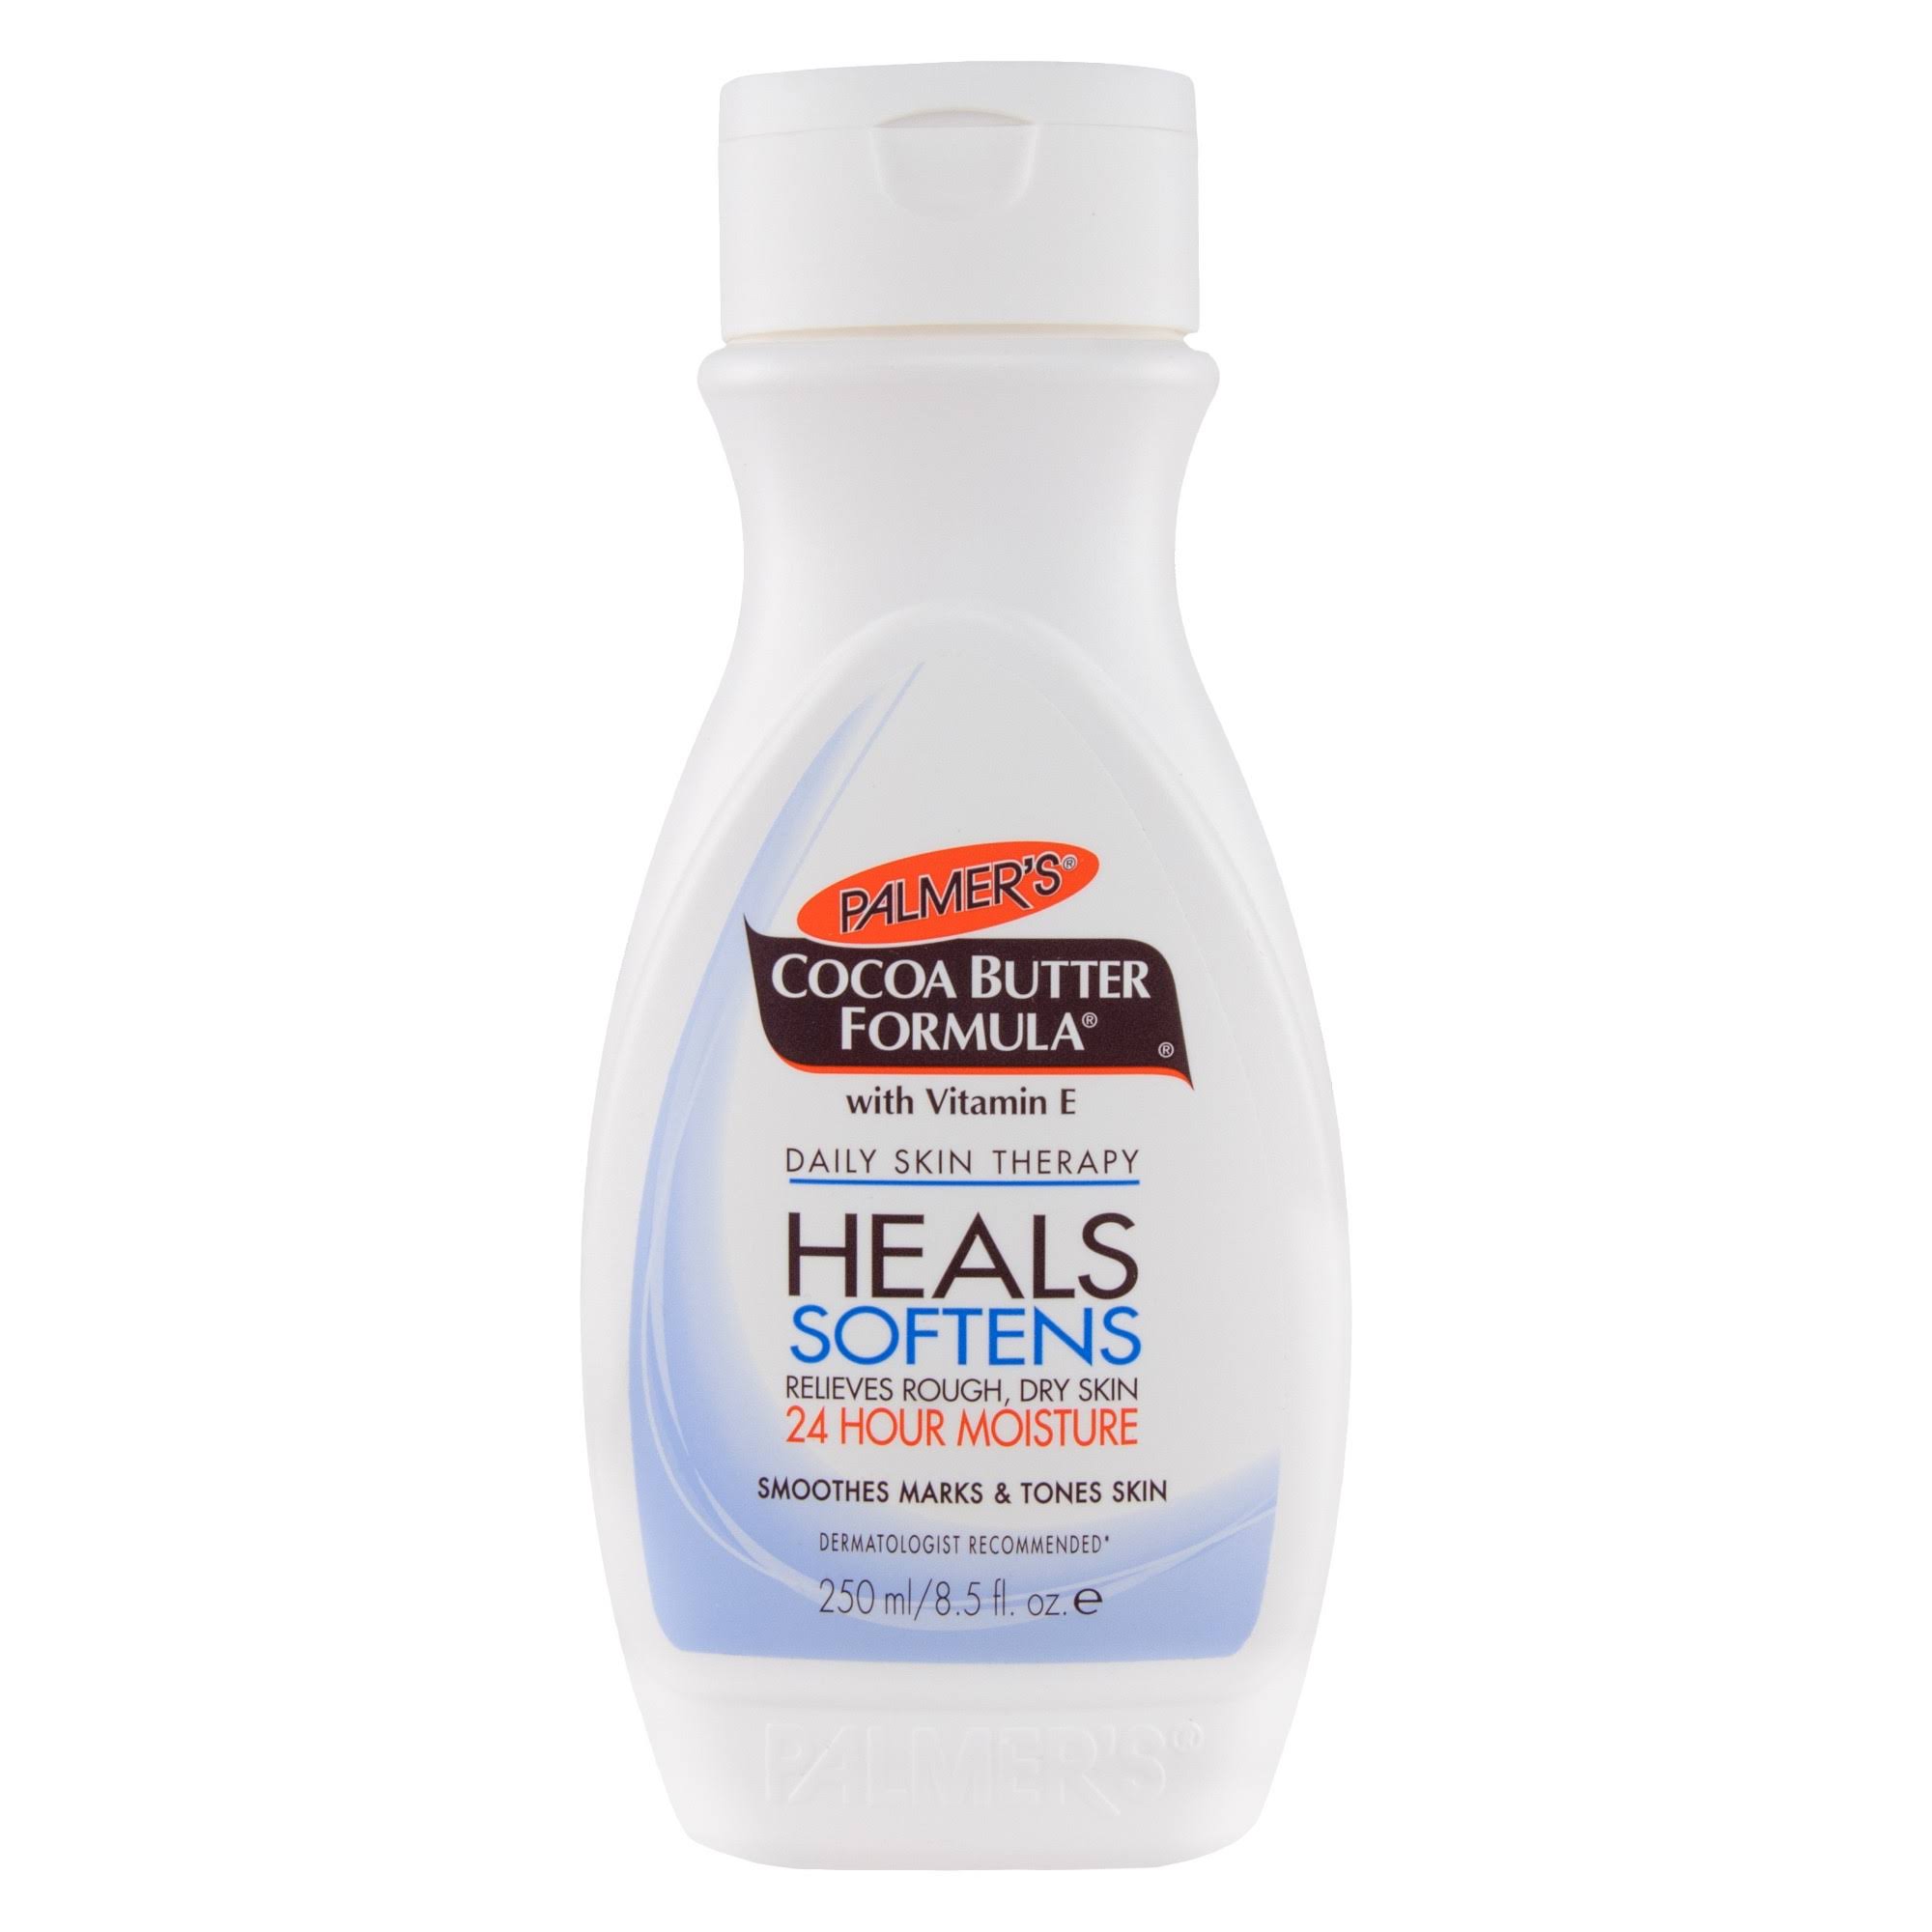 Palmers Cocoa Butter Formula Lotion - 350ml